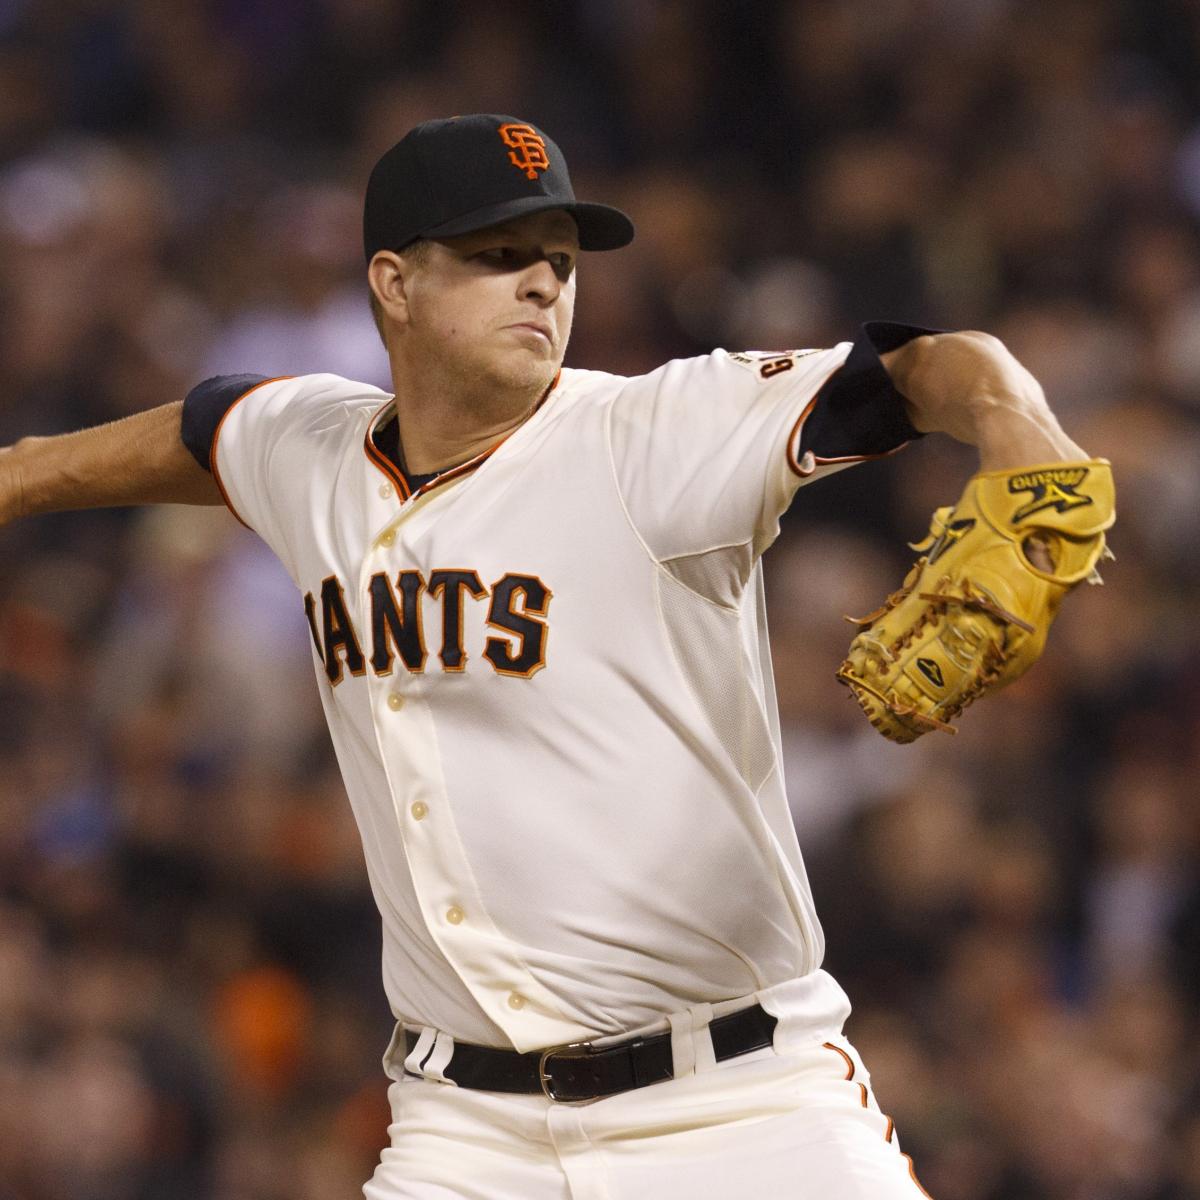 Cain's perfect game makes Giants move look brilliant 